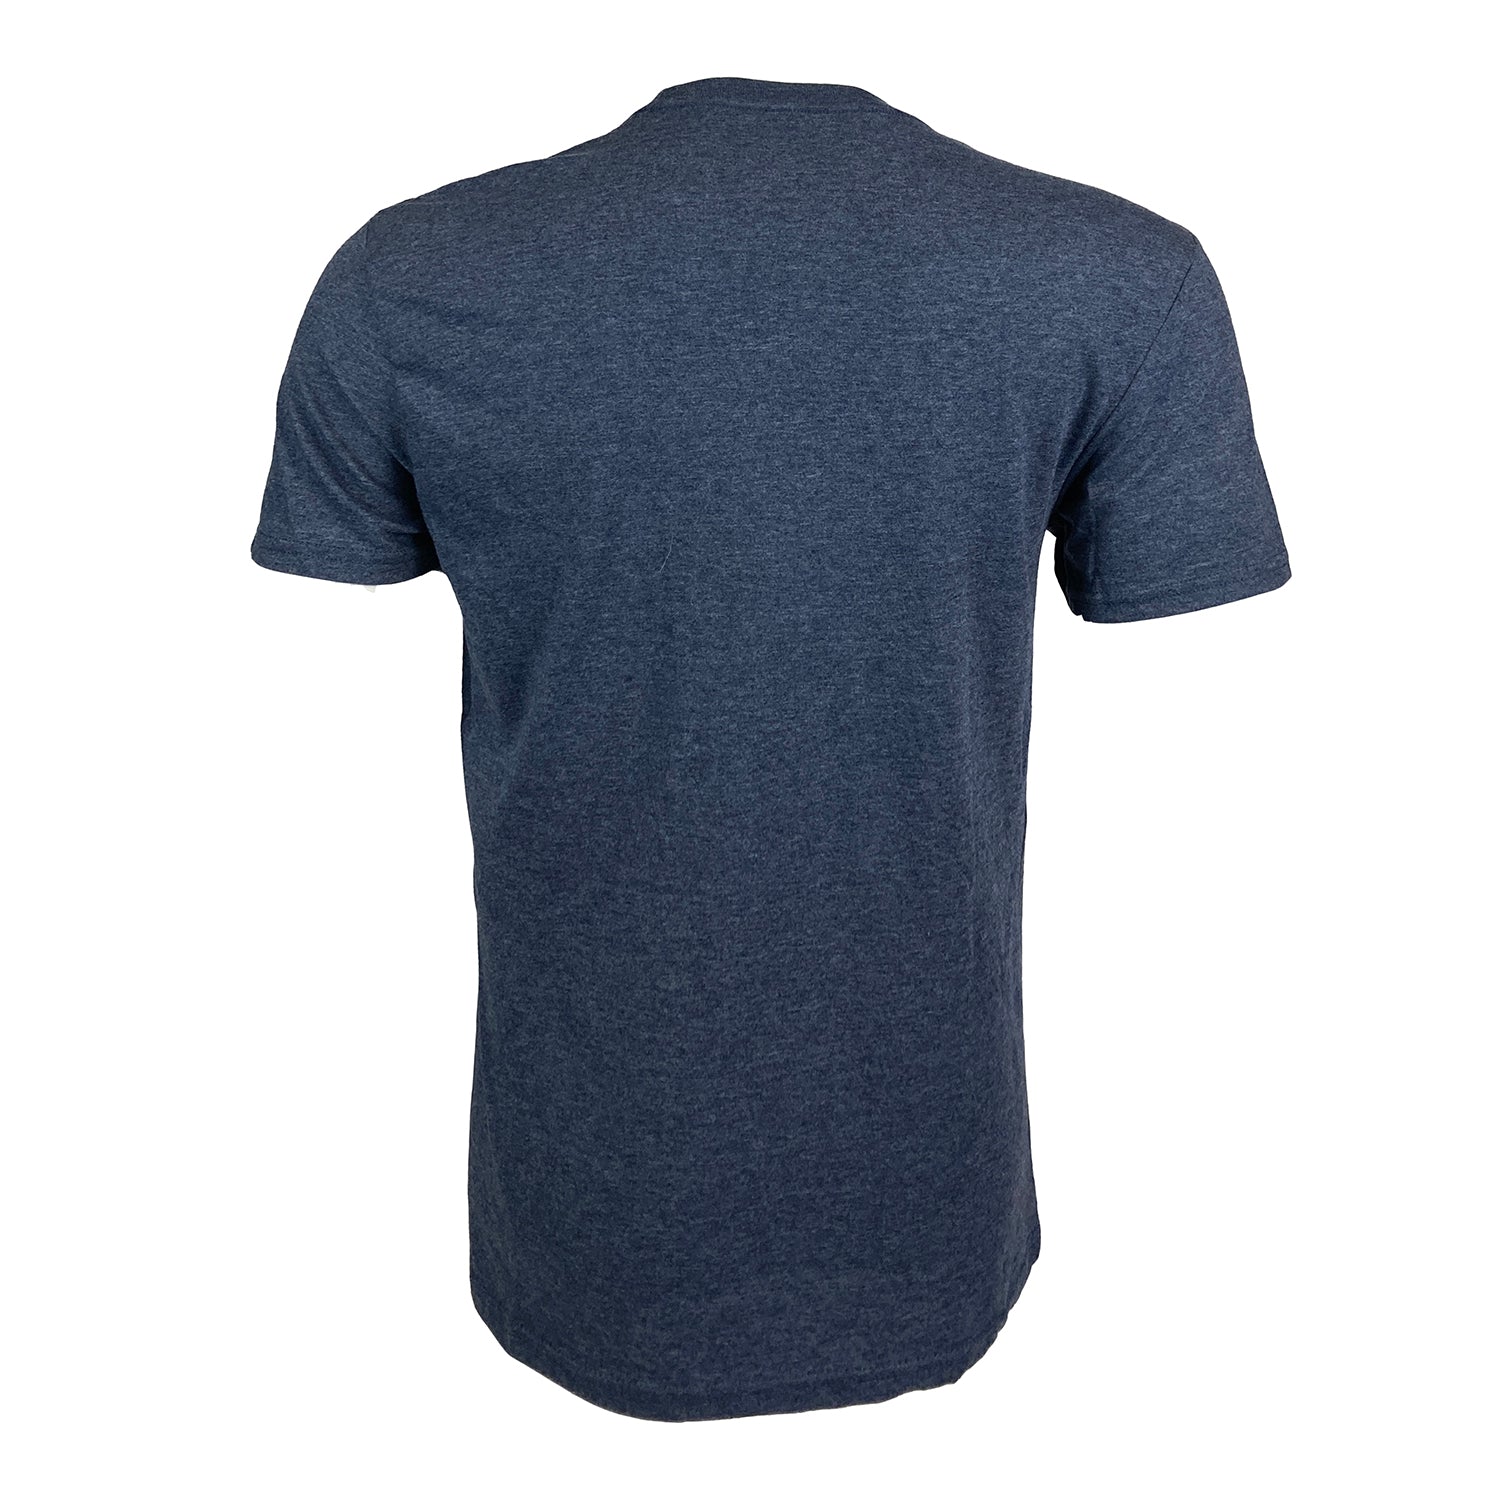 Blue tee shown from the back.